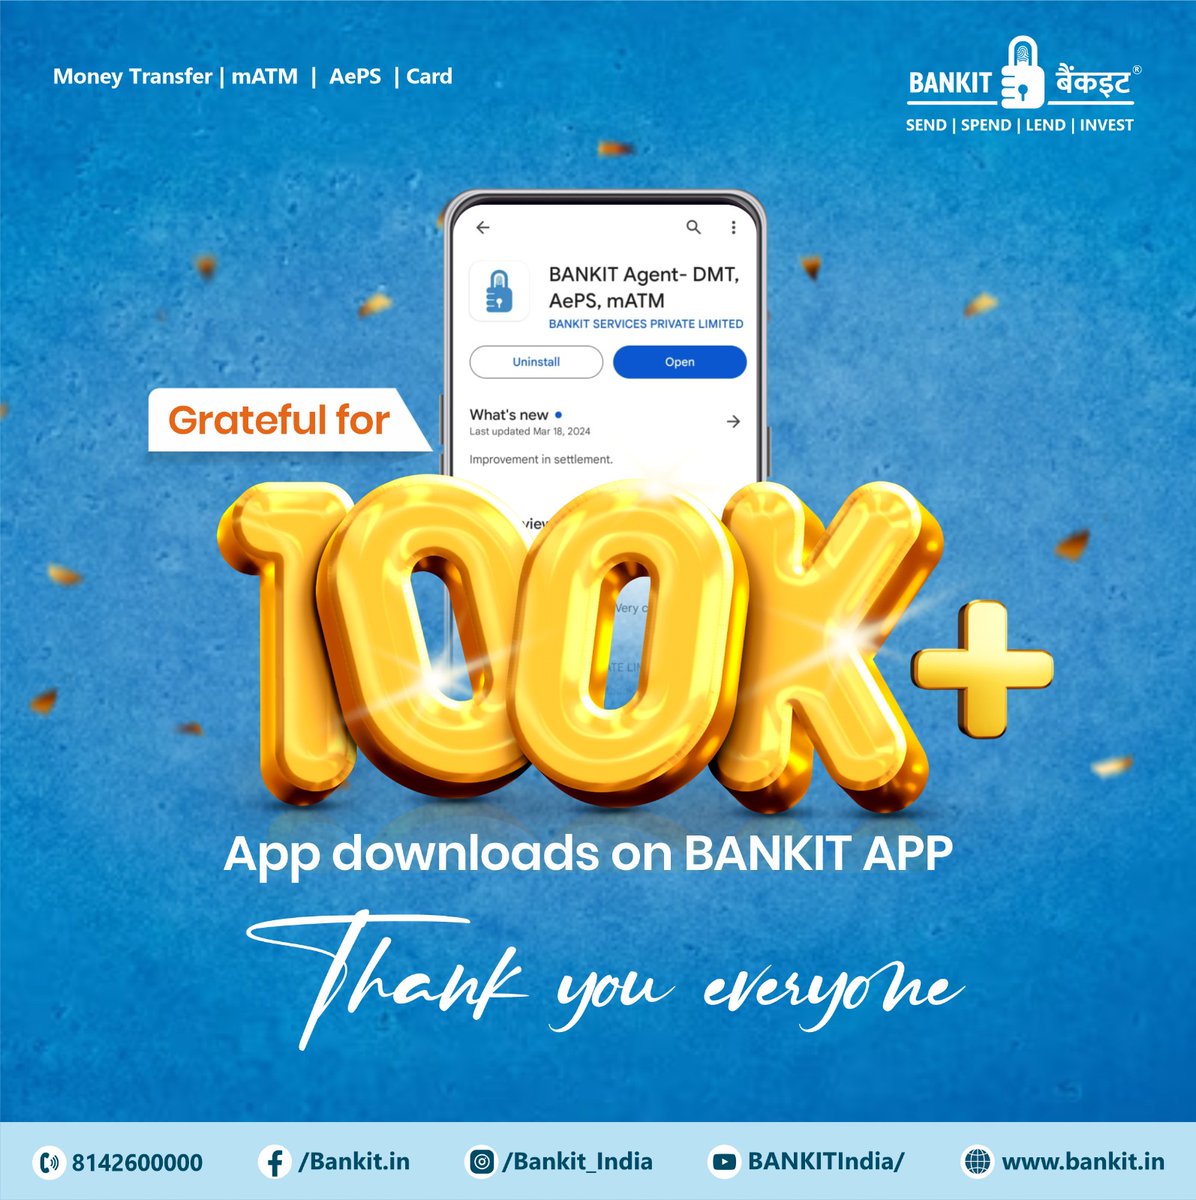 Wow! Thrilled to Reach 100k+ Downloads on BANKIT APP! Big Thanks to all for your incredible support!
#MilestoneReached #FintechRevolution #EmpoweringCommunities #BankingMadeEasy #GratefulJourney